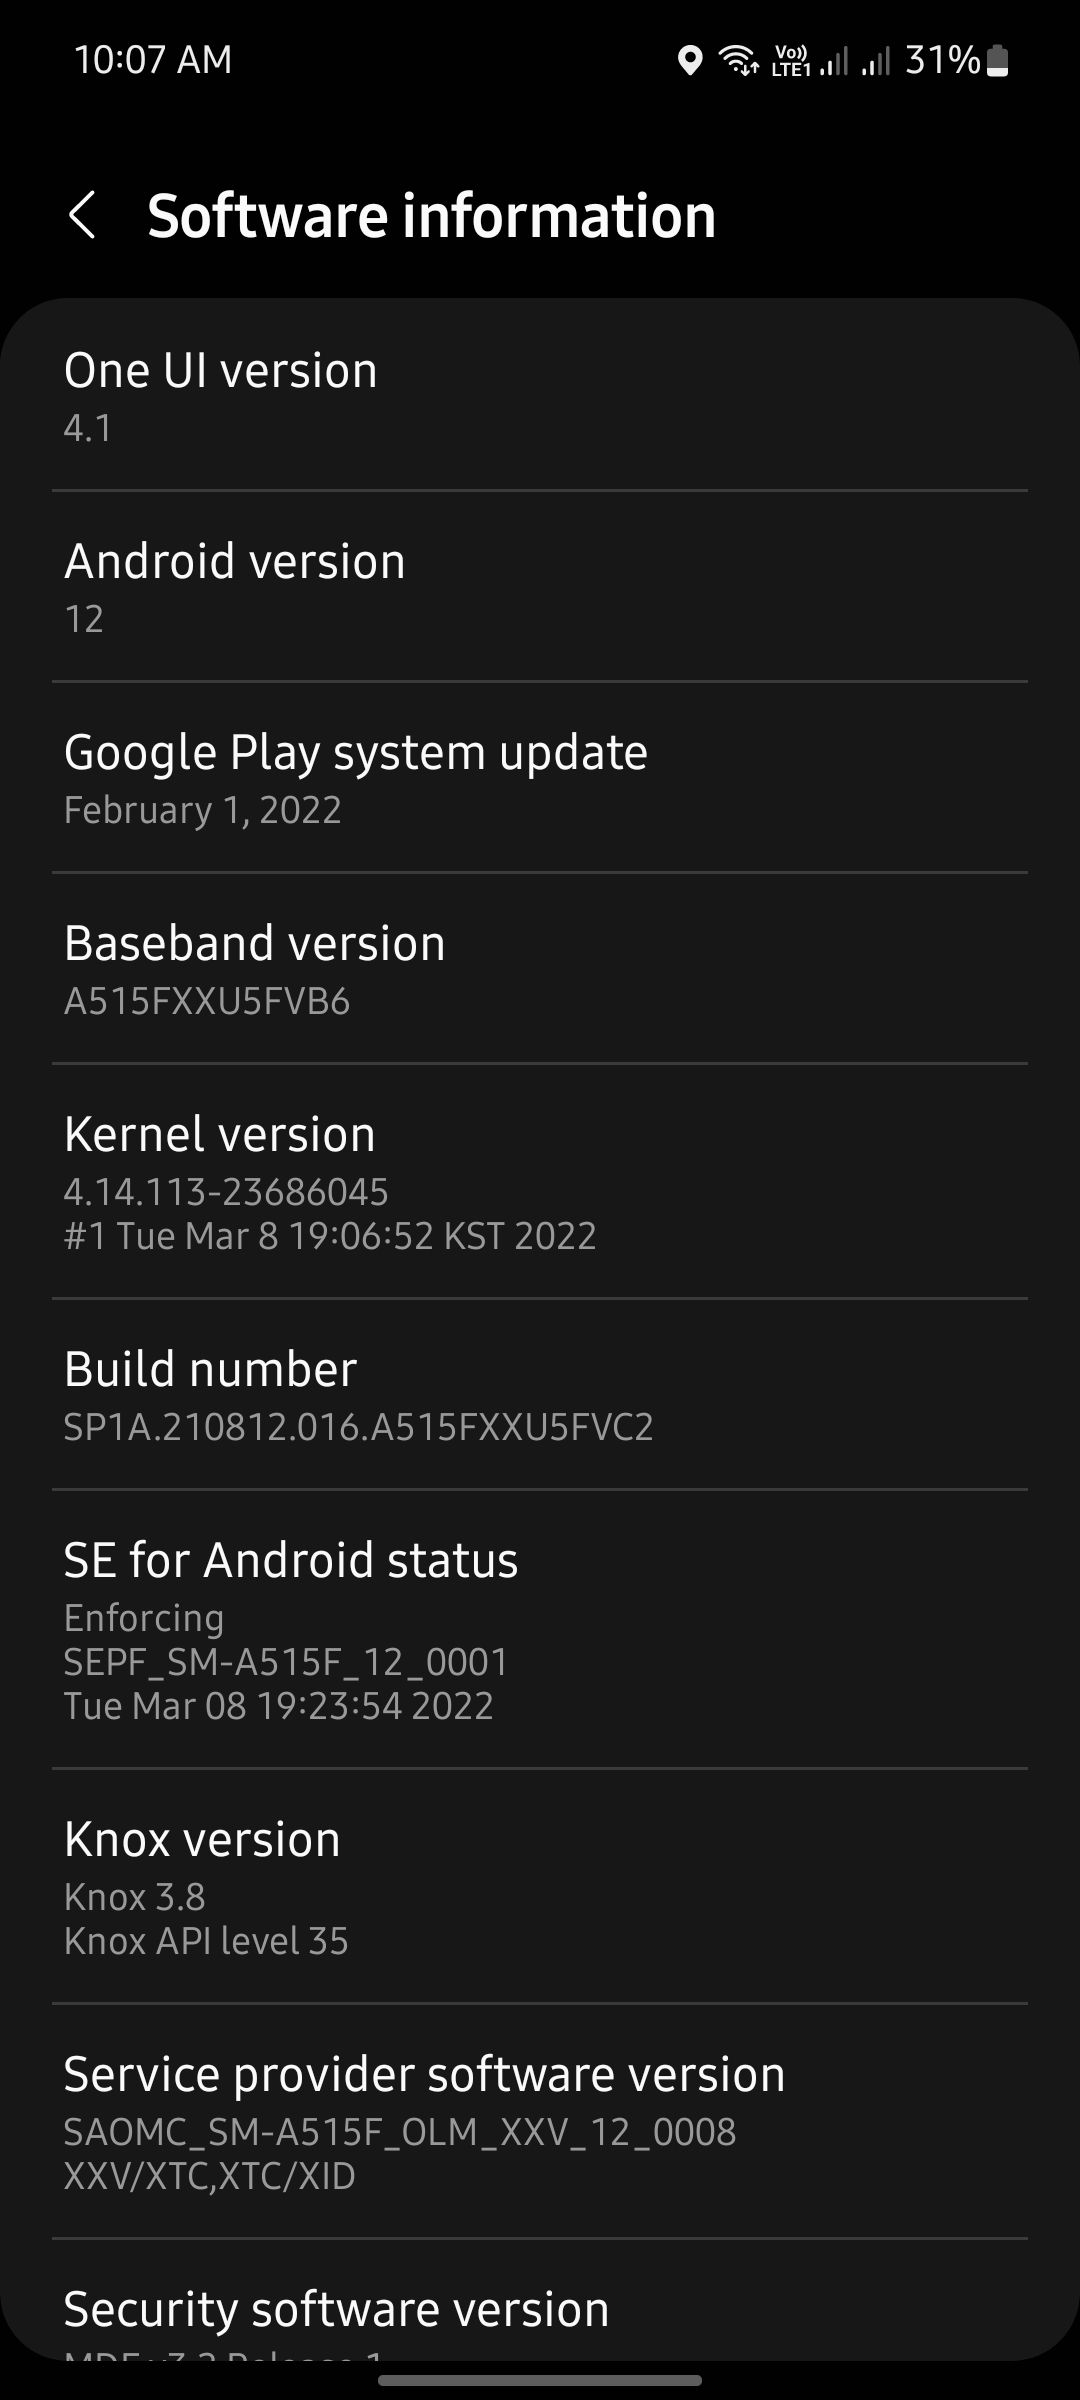 Galaxy A51: One UI 4.1 (Android 12) update - Page 2 - Samsung Members